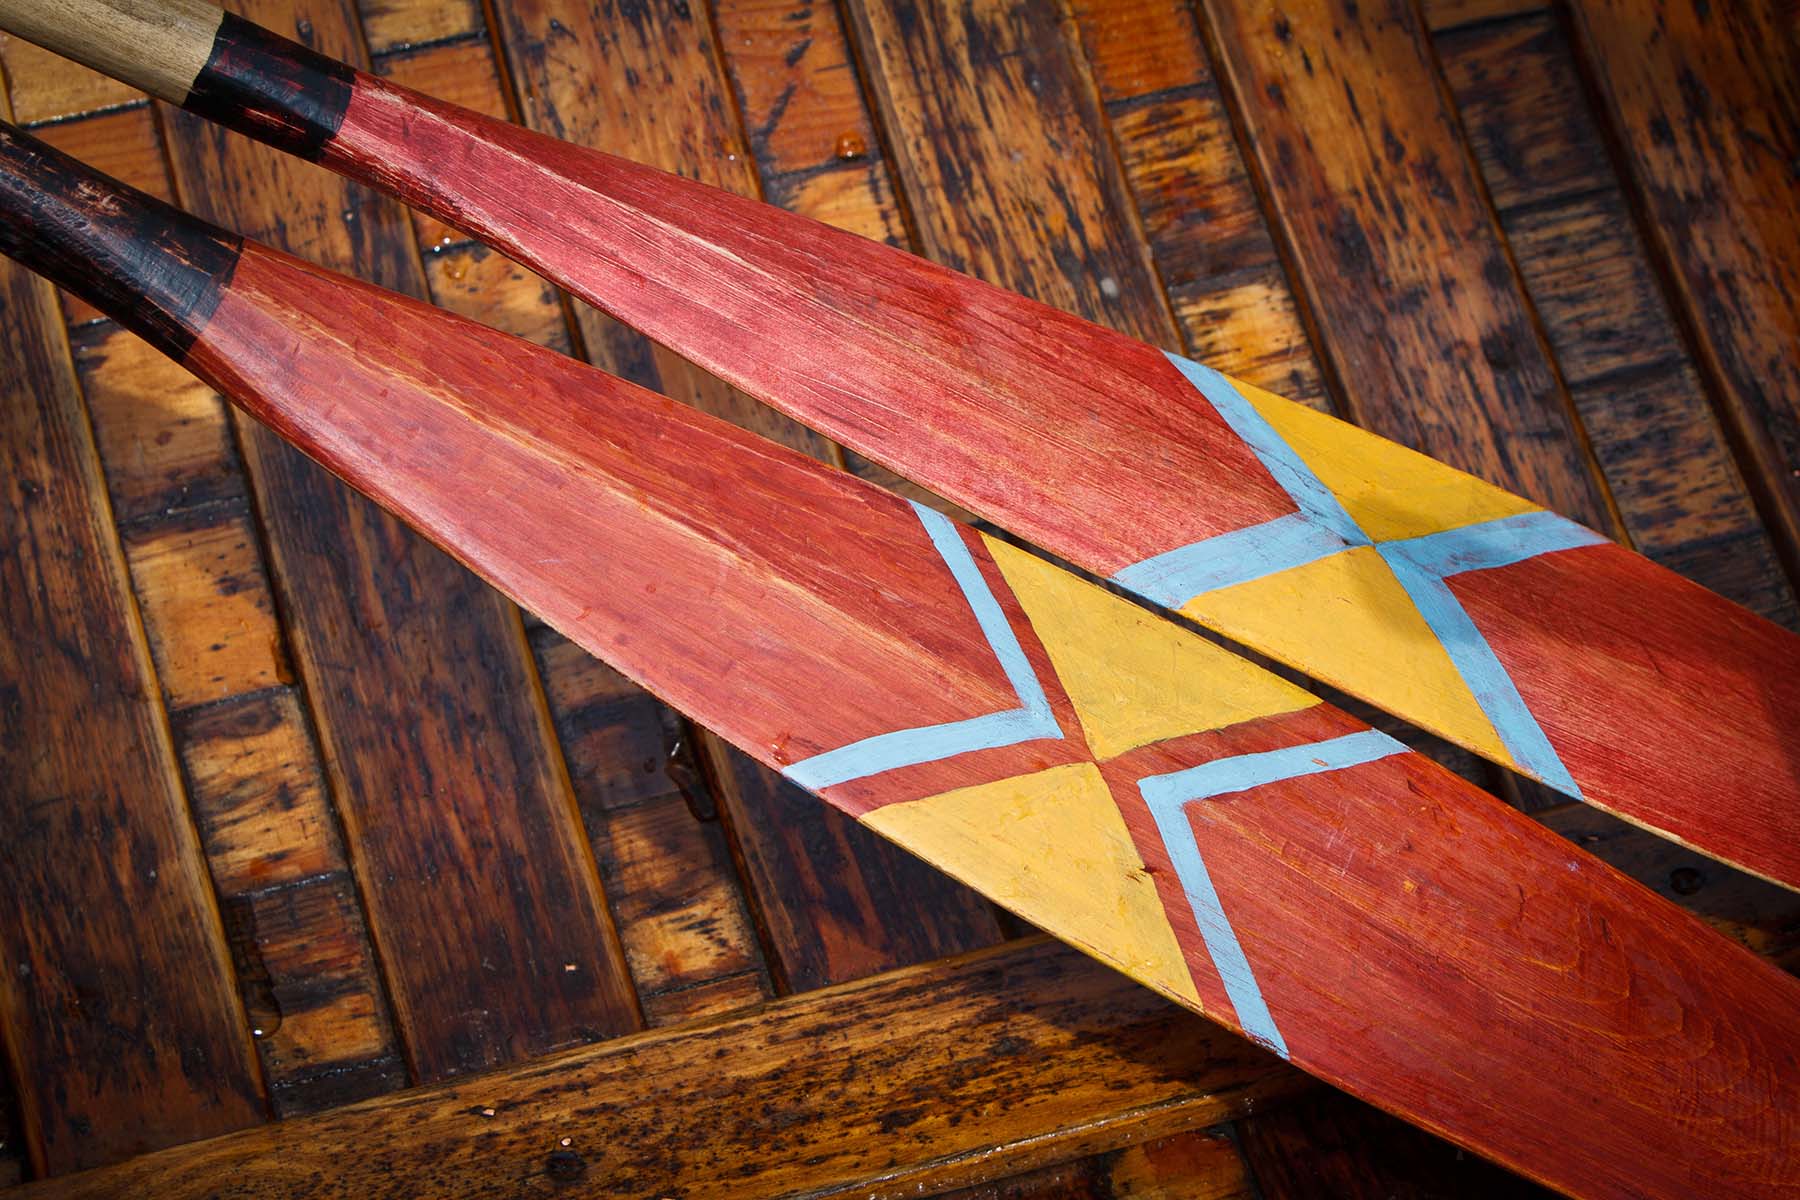 Two voyageur canoe paddles with blue and yellow designs lay side by side against the bottom of a wooden canoe.